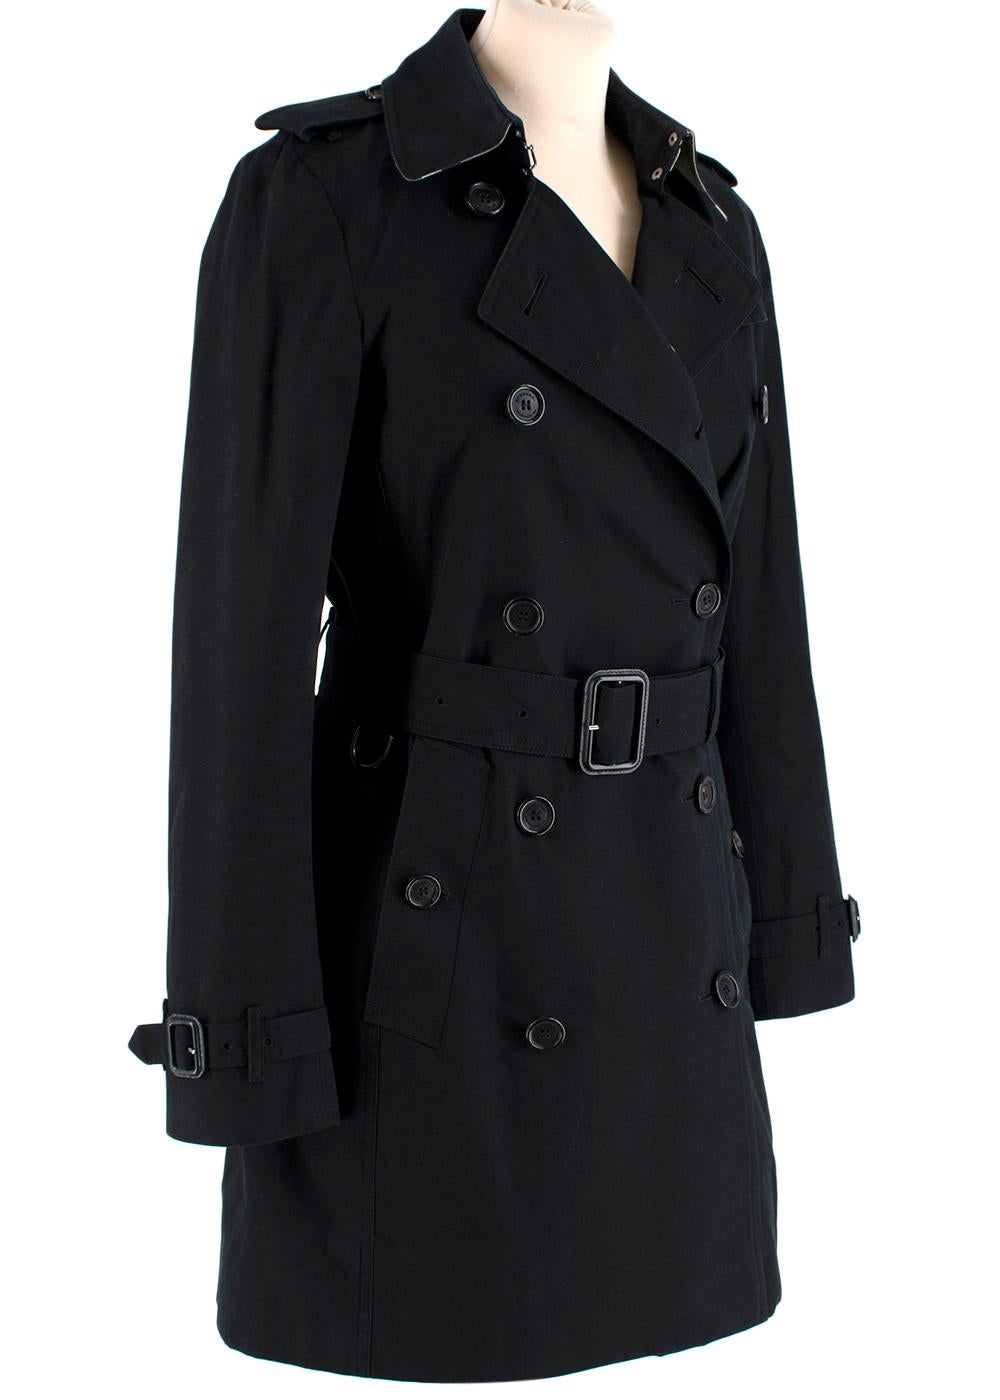 Burberry Black Mid-Length Chelsea Heritage Trench Coat

A slim-fit trench coat, with a clean-cut silhouette and rounded shoulders. The archive-inspired style is woven in Burberry's signature gabardine with a Vintage check lining.

- Double-breasted